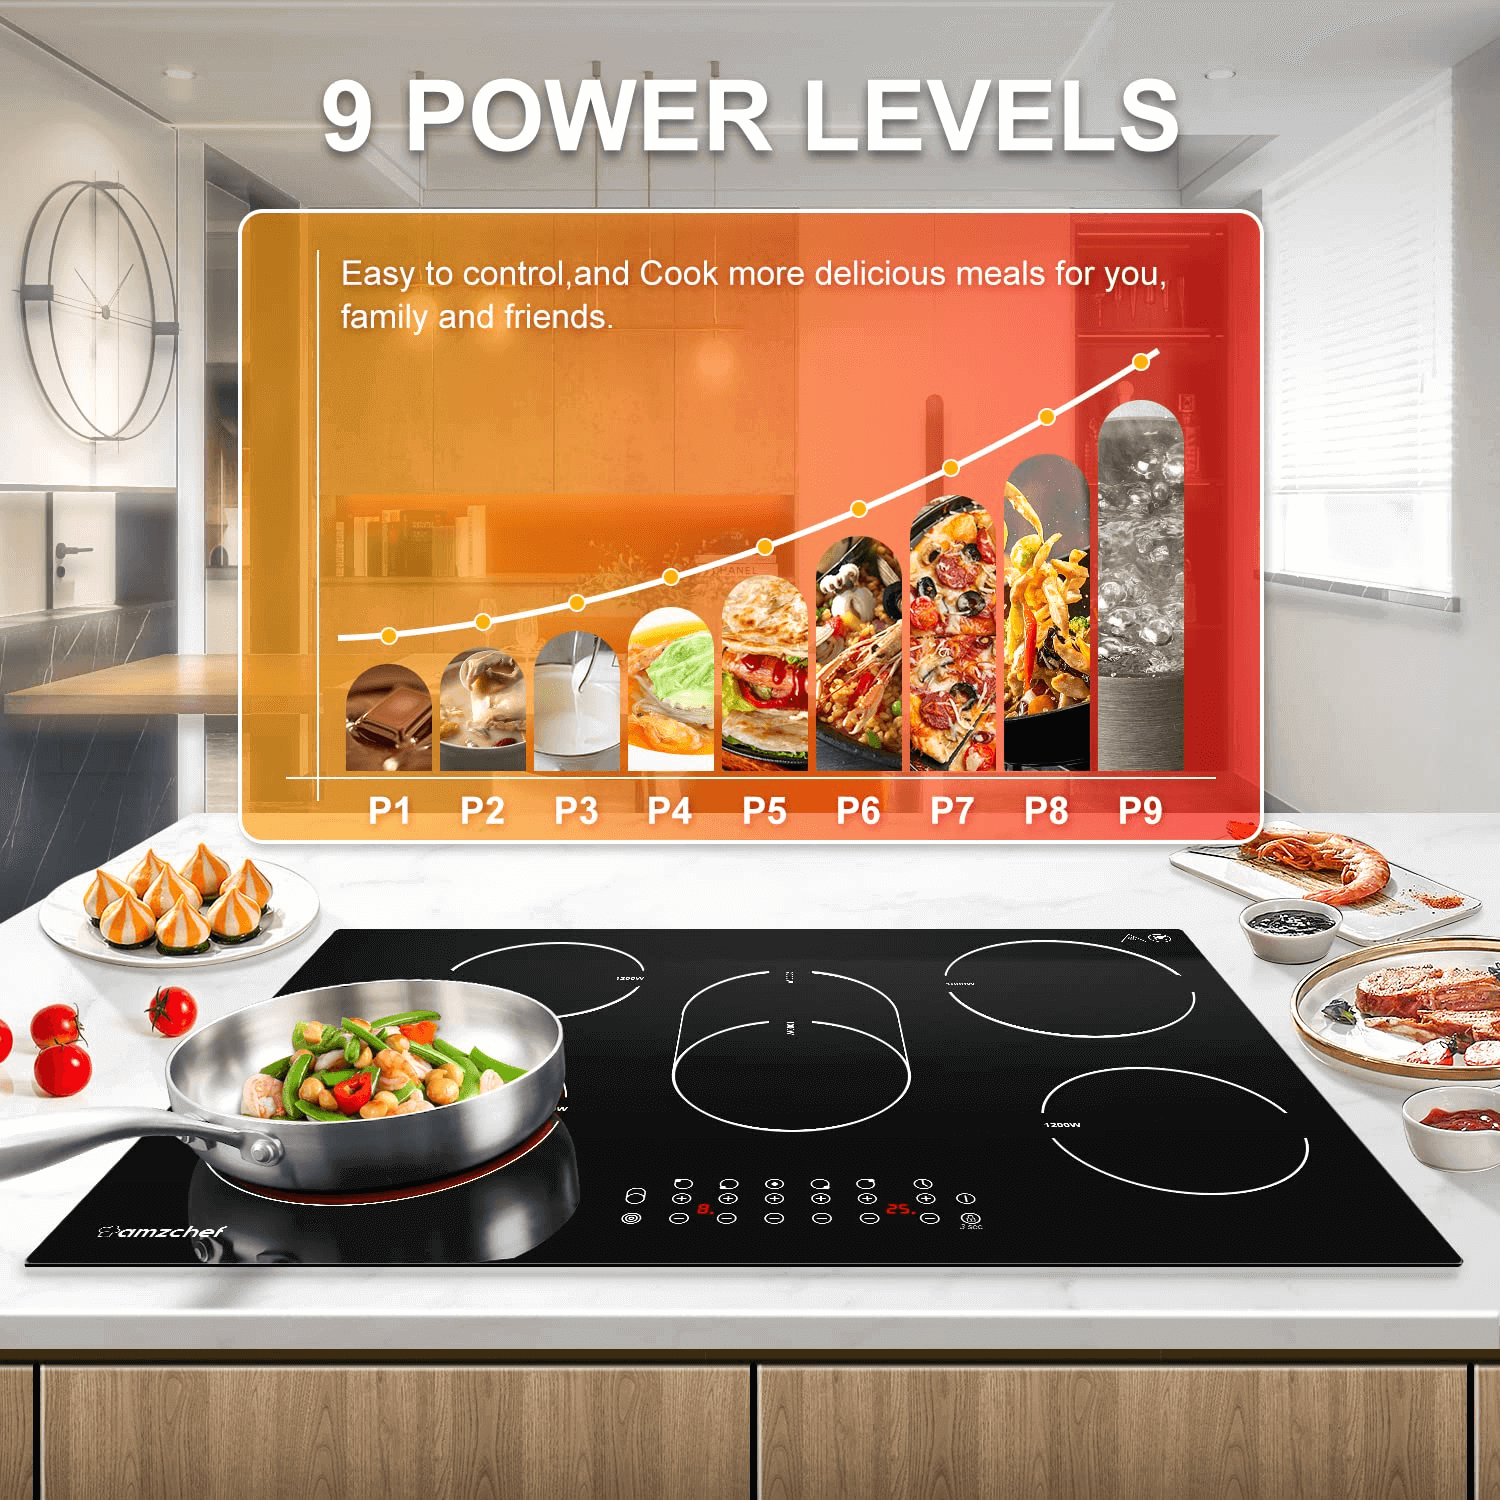 Double Induction Cooktop, 2 Burners Induction Cooktop 110v, 12 inch  Portable Electric Stove Top and Countertop and Built-in Induction  Cooktops,9 Power